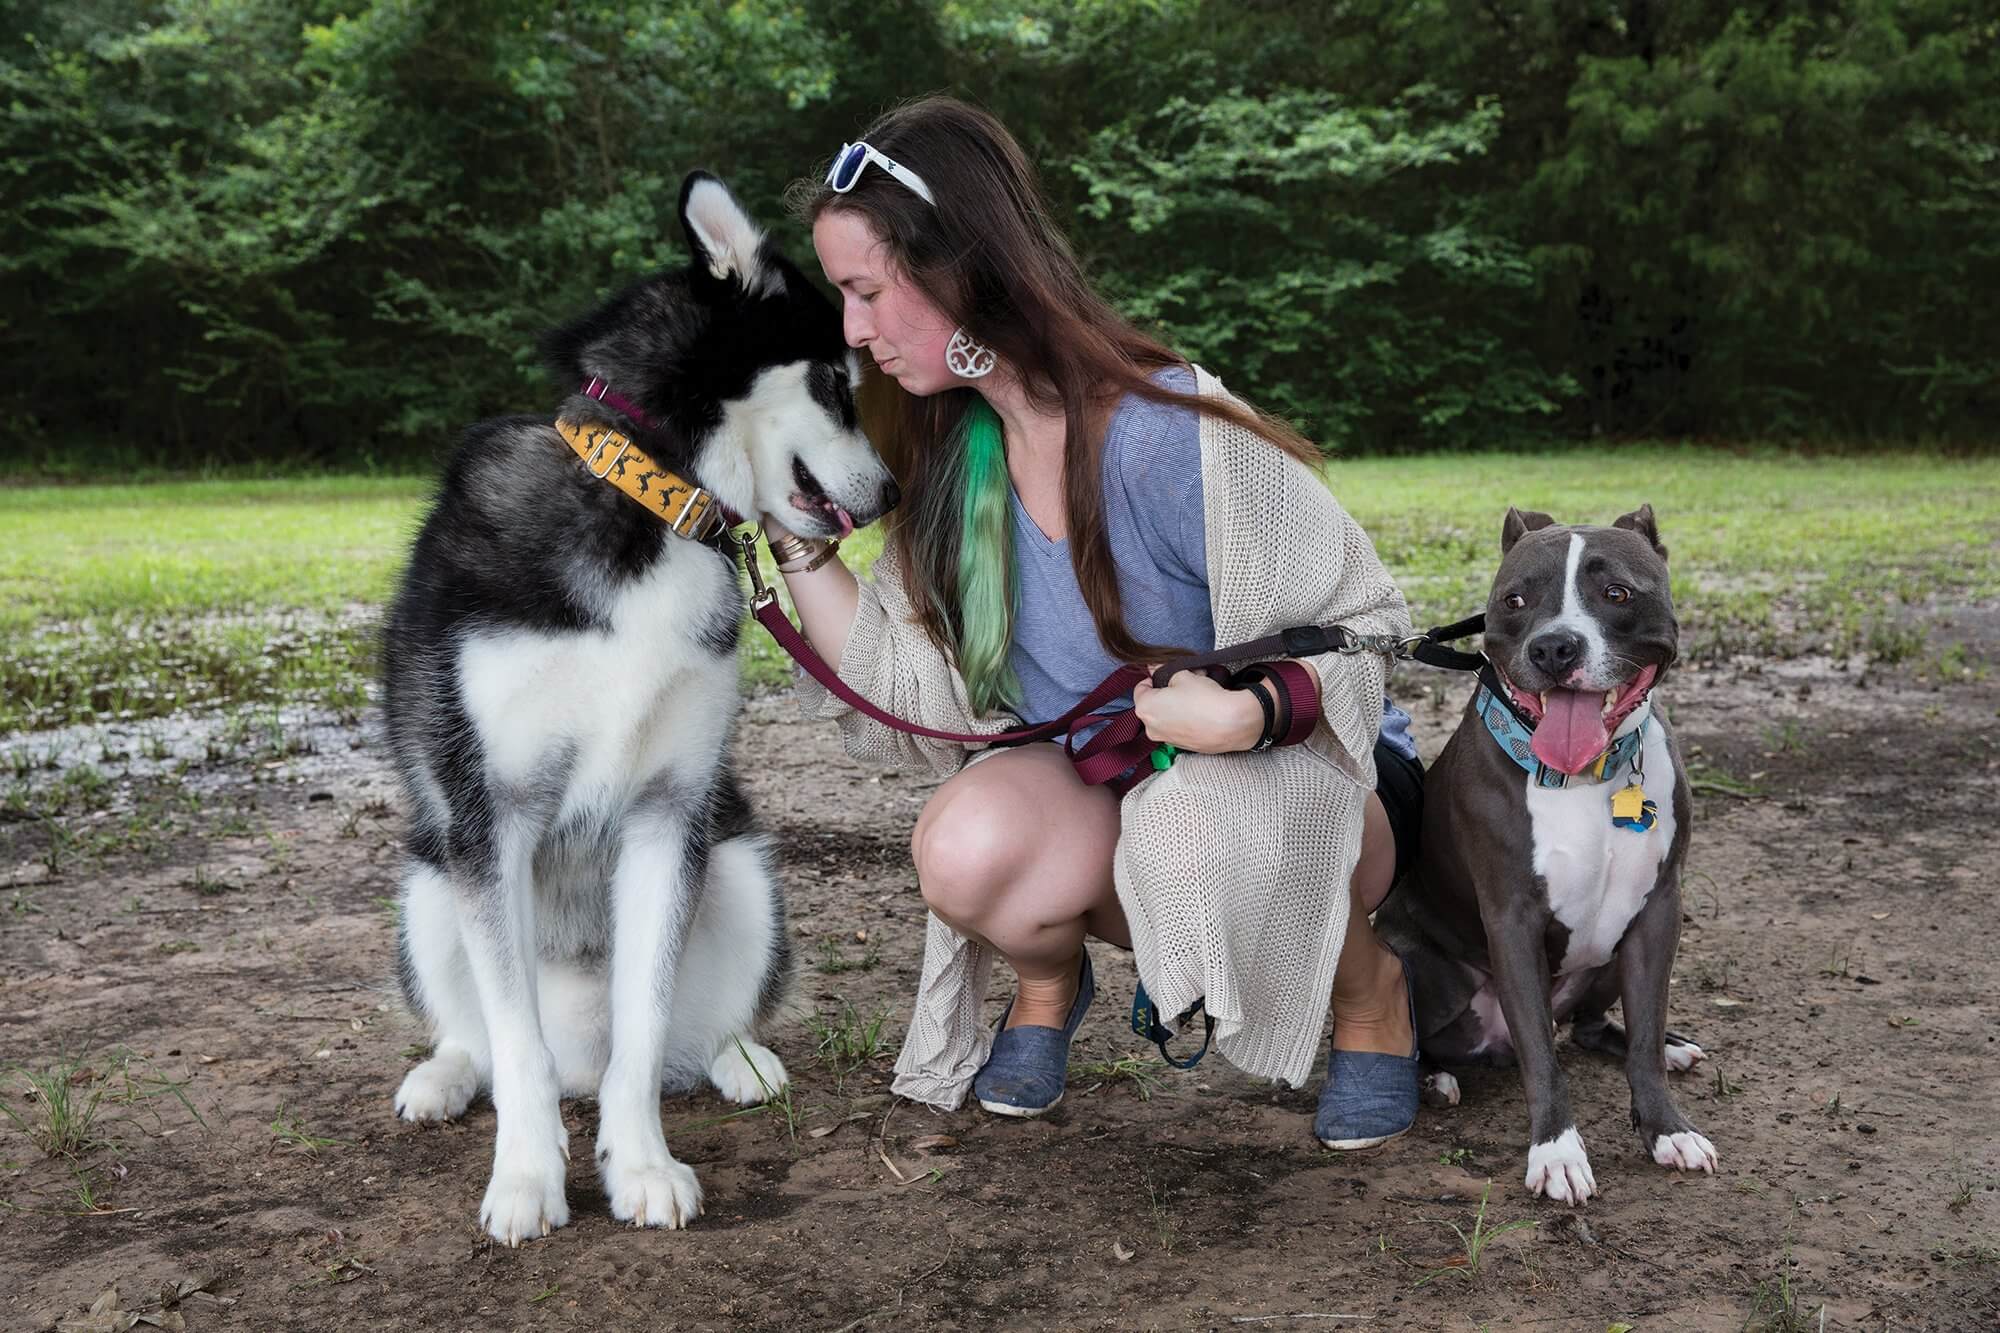 Sarrah Hannon, whose condition leaves her with excessively loose joints, with her dogs at a dog park near her home.